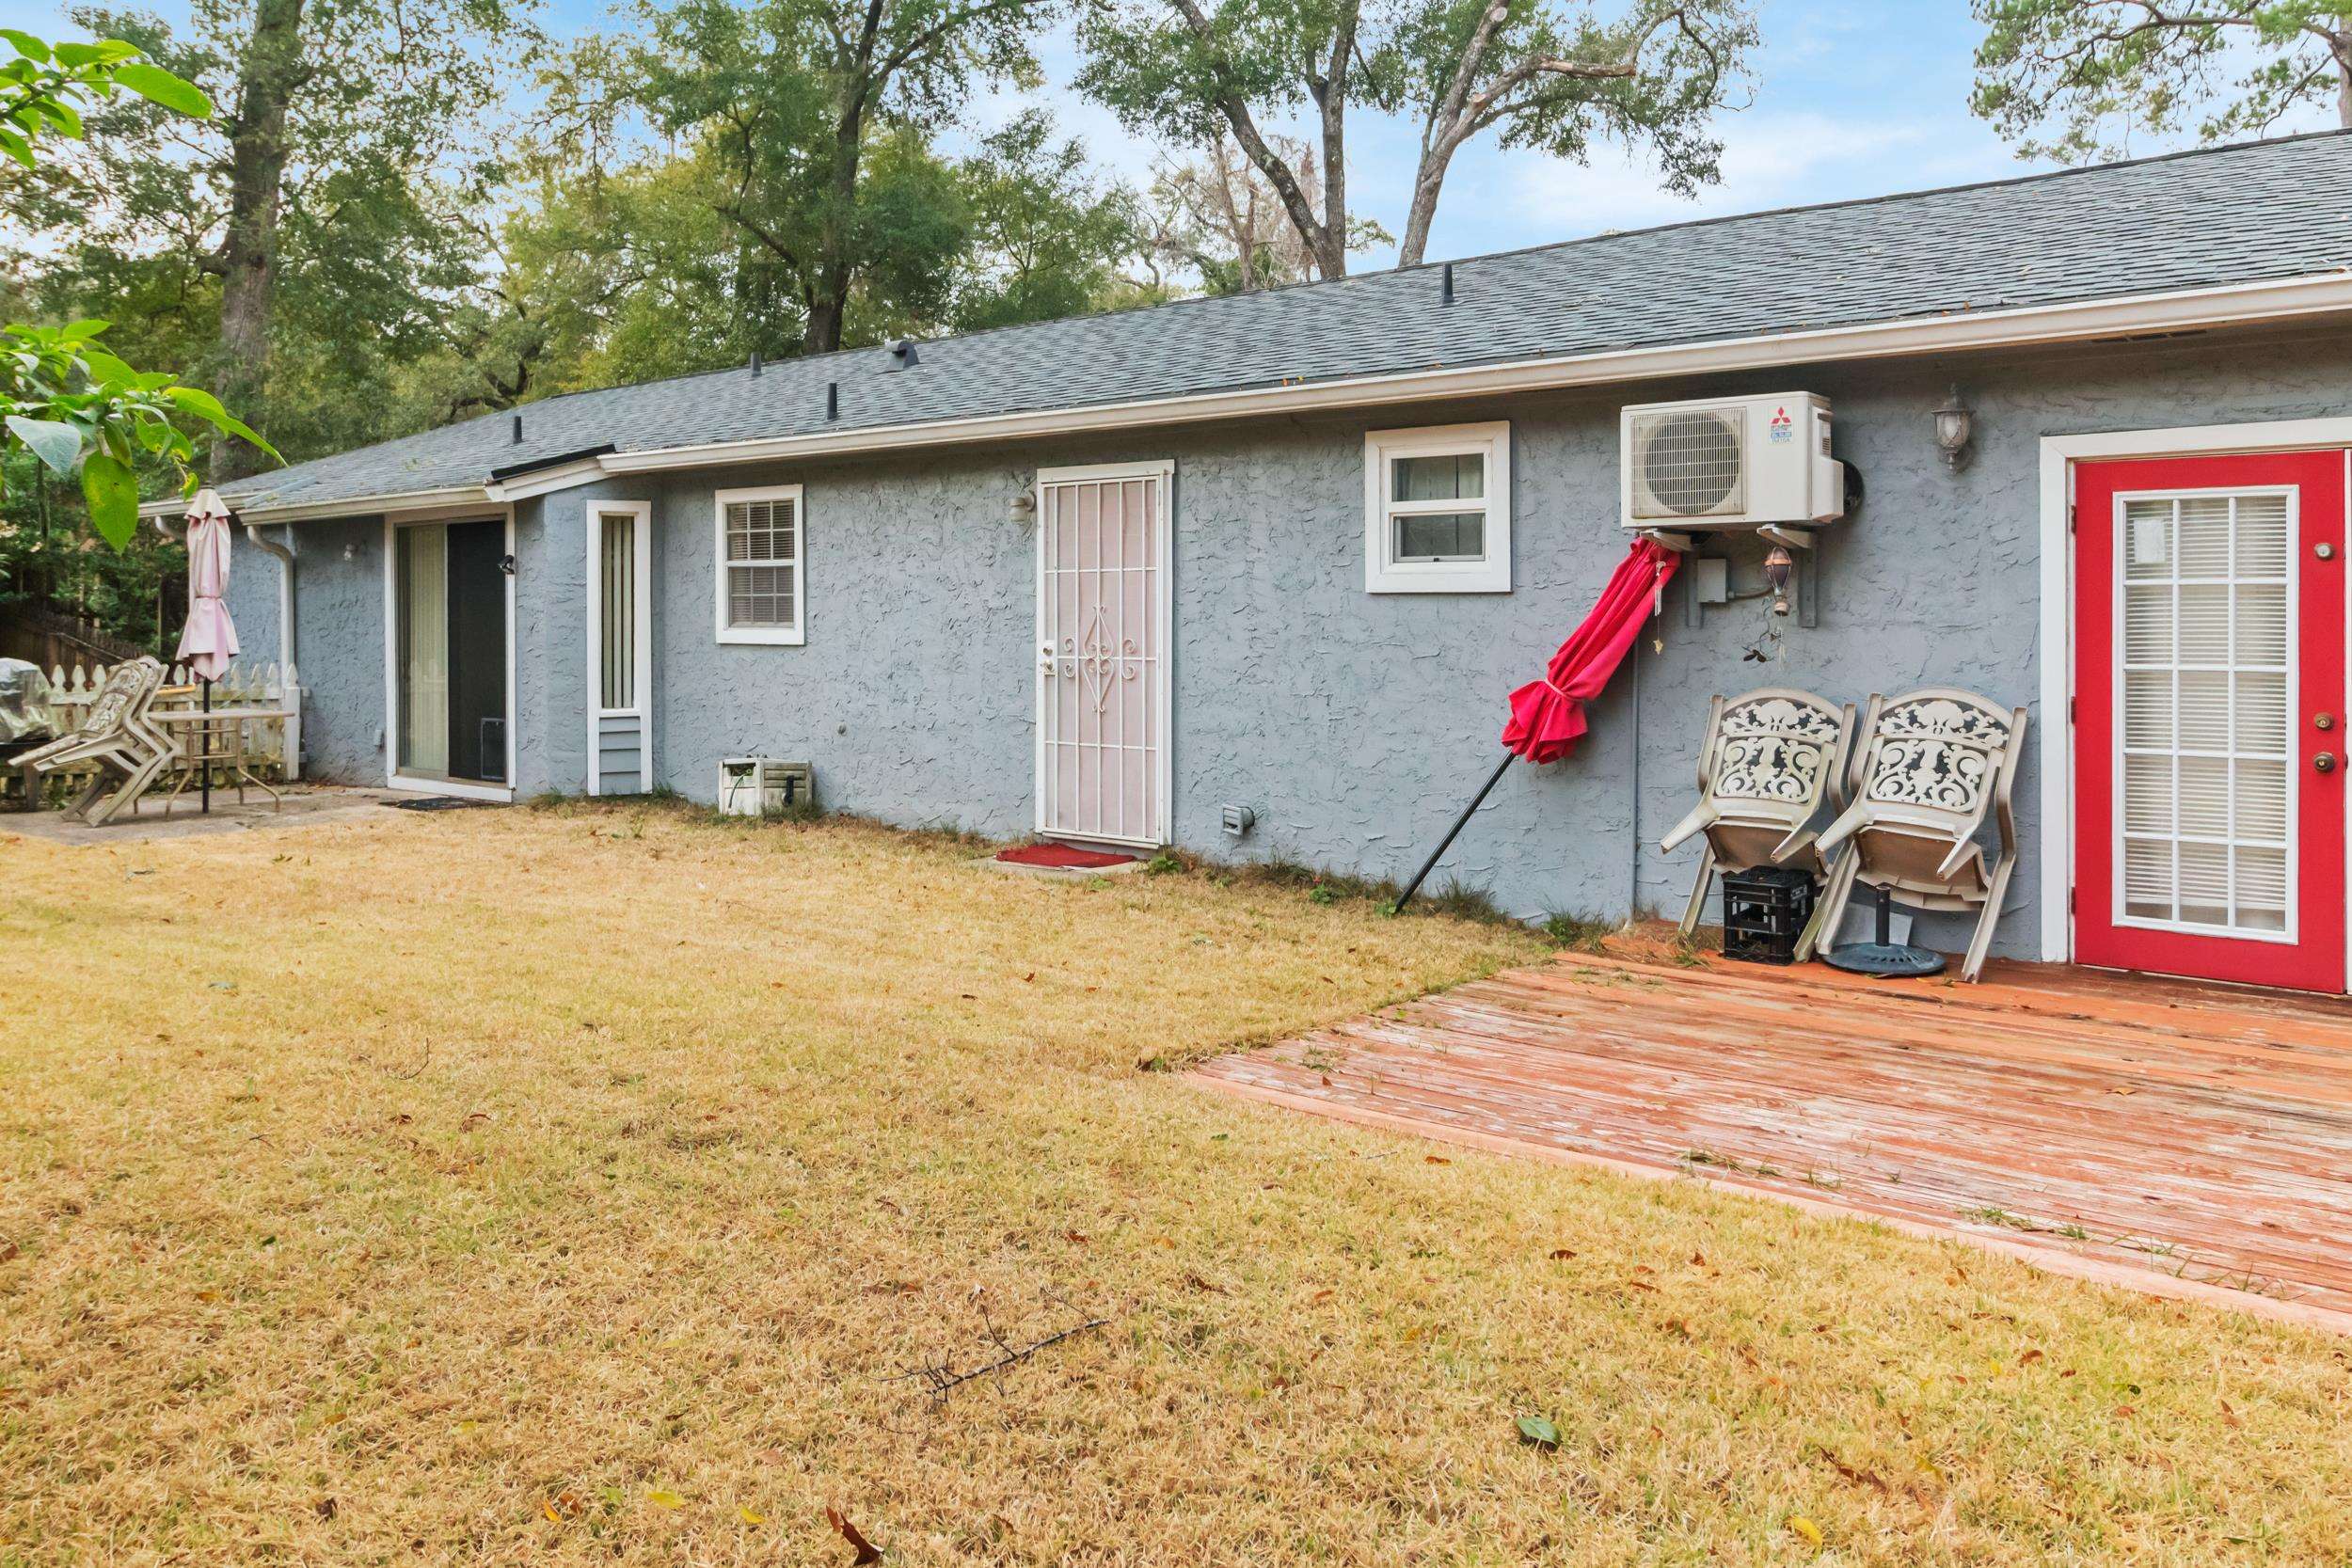 1903 Trapnell Street,TALLAHASSEE,Florida 32310,4 Bedrooms Bedrooms,2 BathroomsBathrooms,Detached single family,1903 Trapnell Street,366880